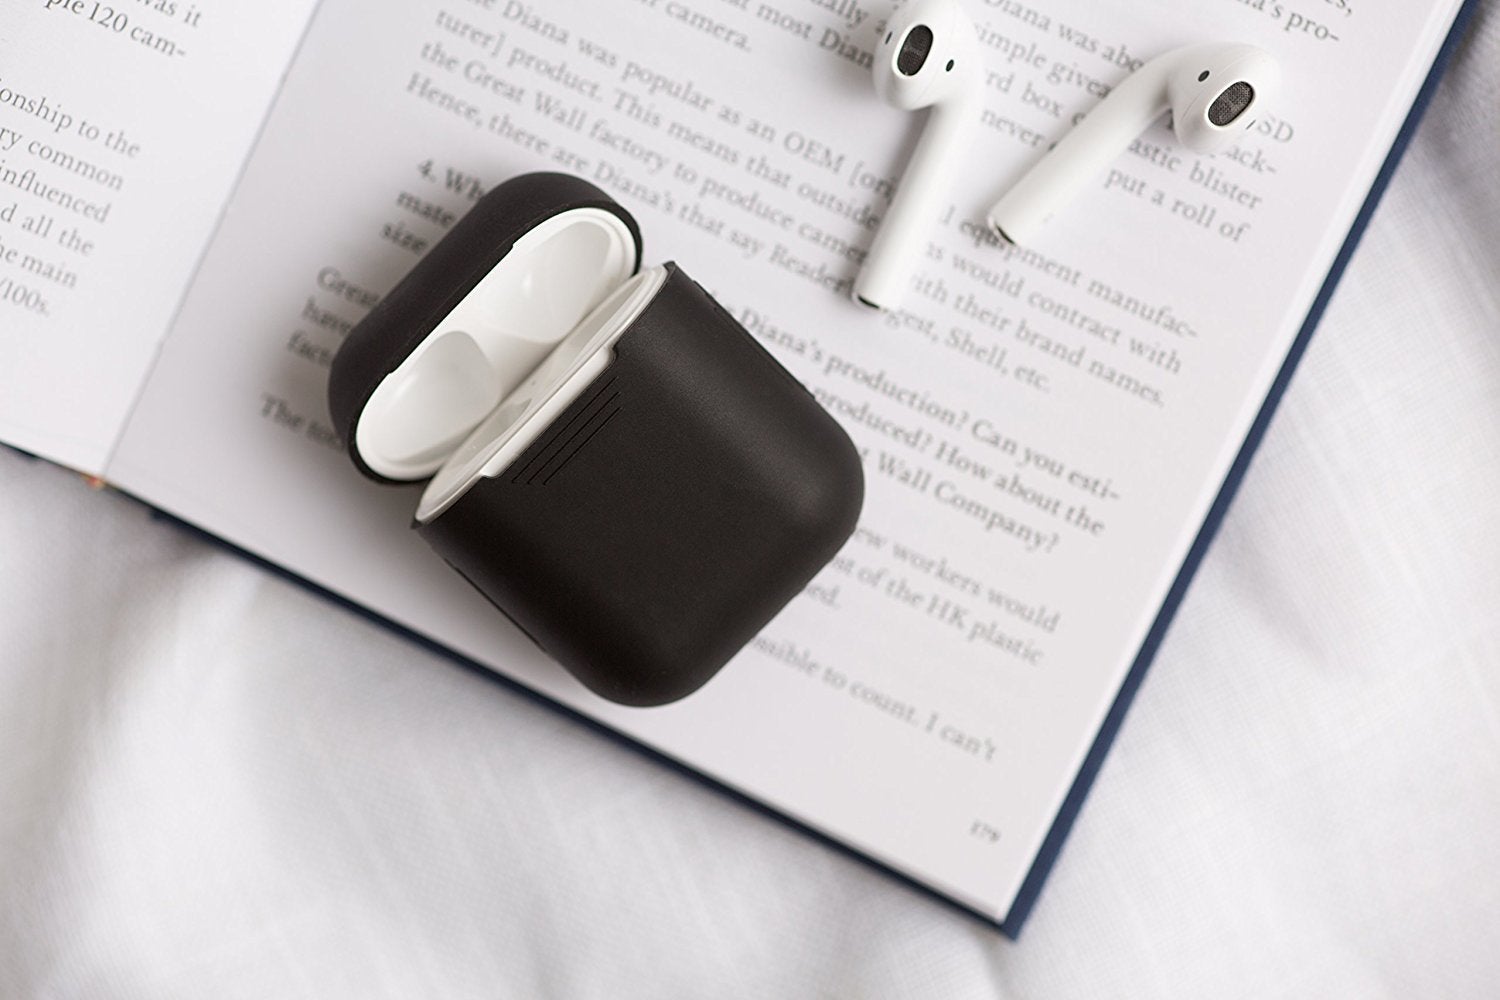 Best custom AirPods &amp; accessories in 2018: Colorful earbuds, stickers, hooks, cases, and fins